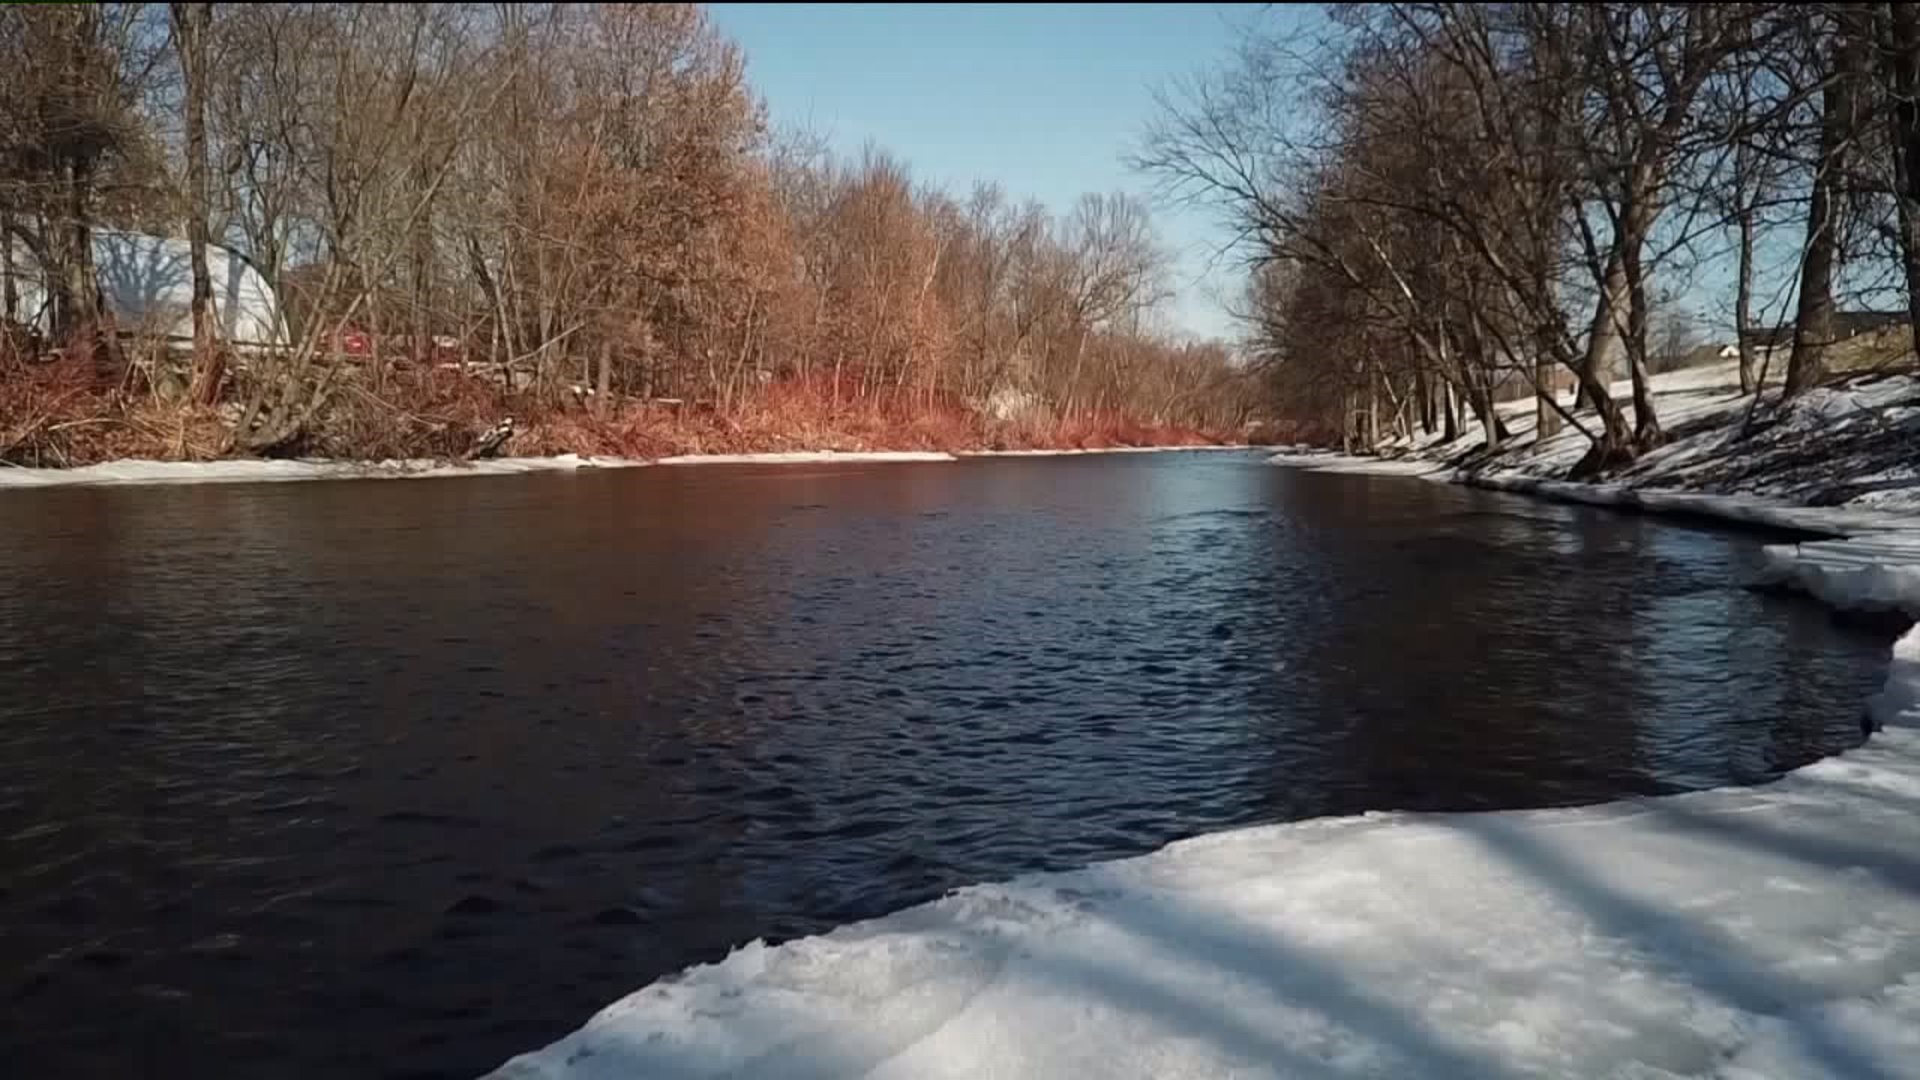 Lackwanna River Nominated for State River of the Year